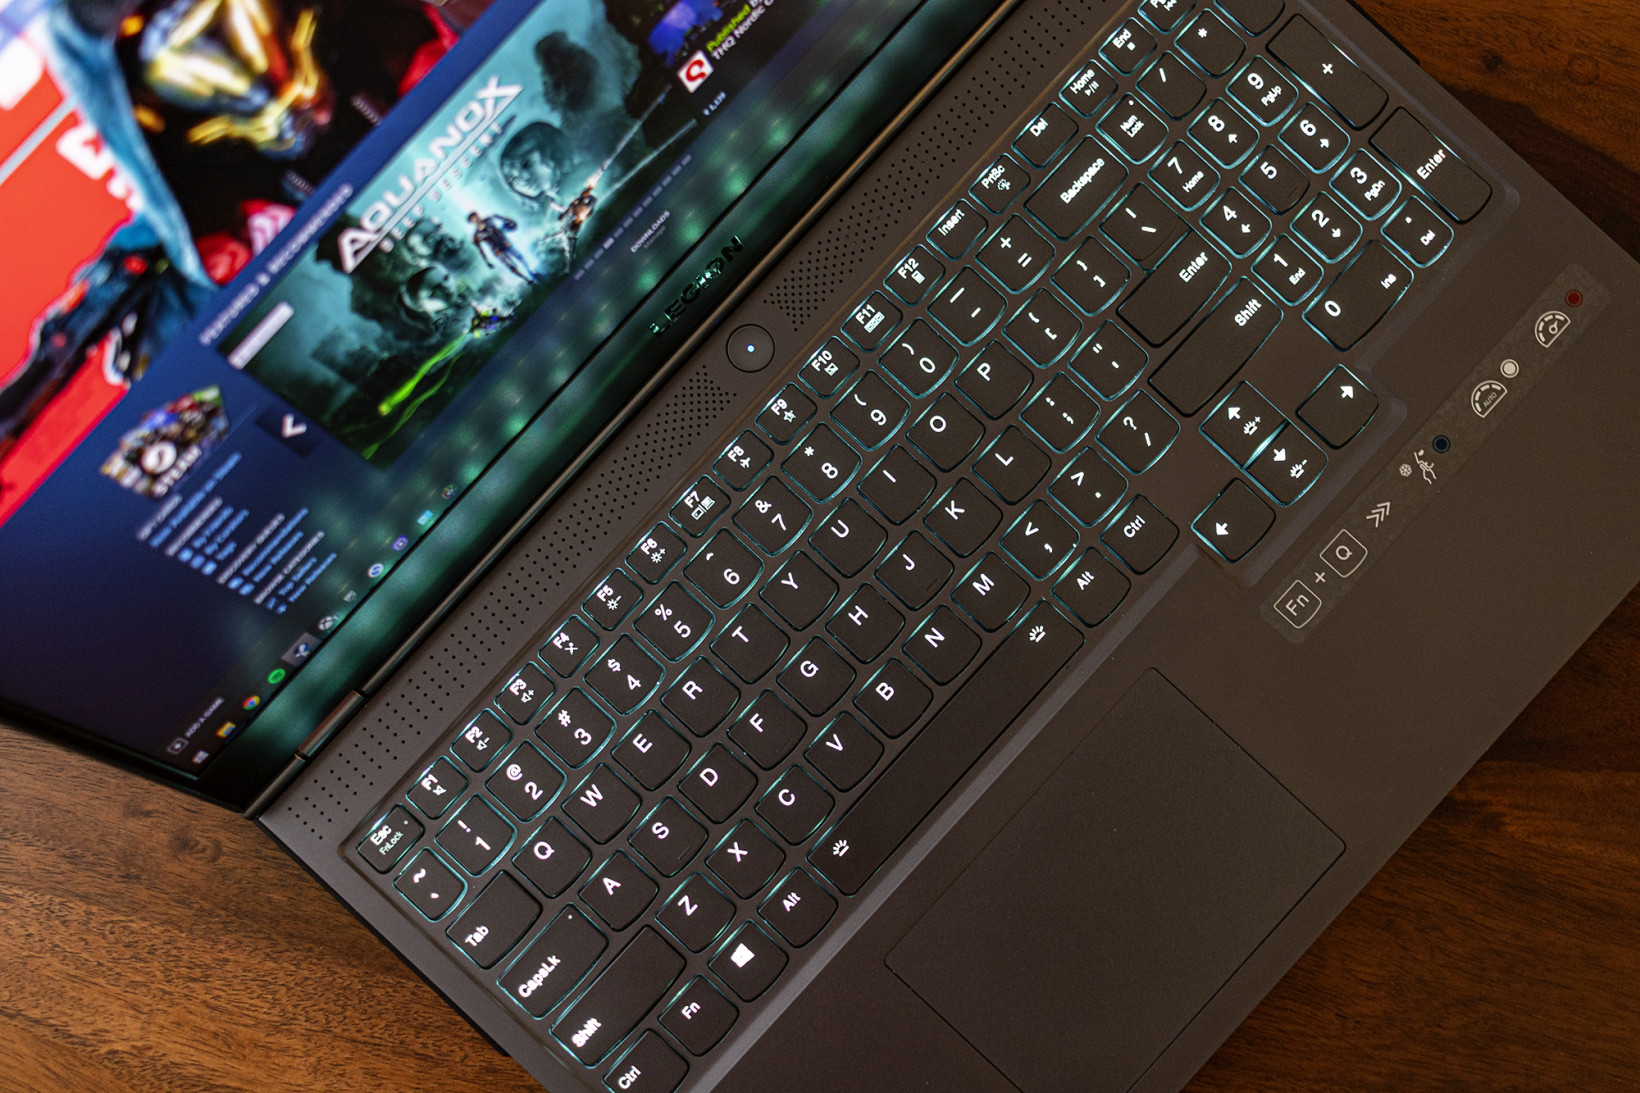 The Lenovo Legion 7i has a great keyboard, complete with numpad and per-key RGB lighting